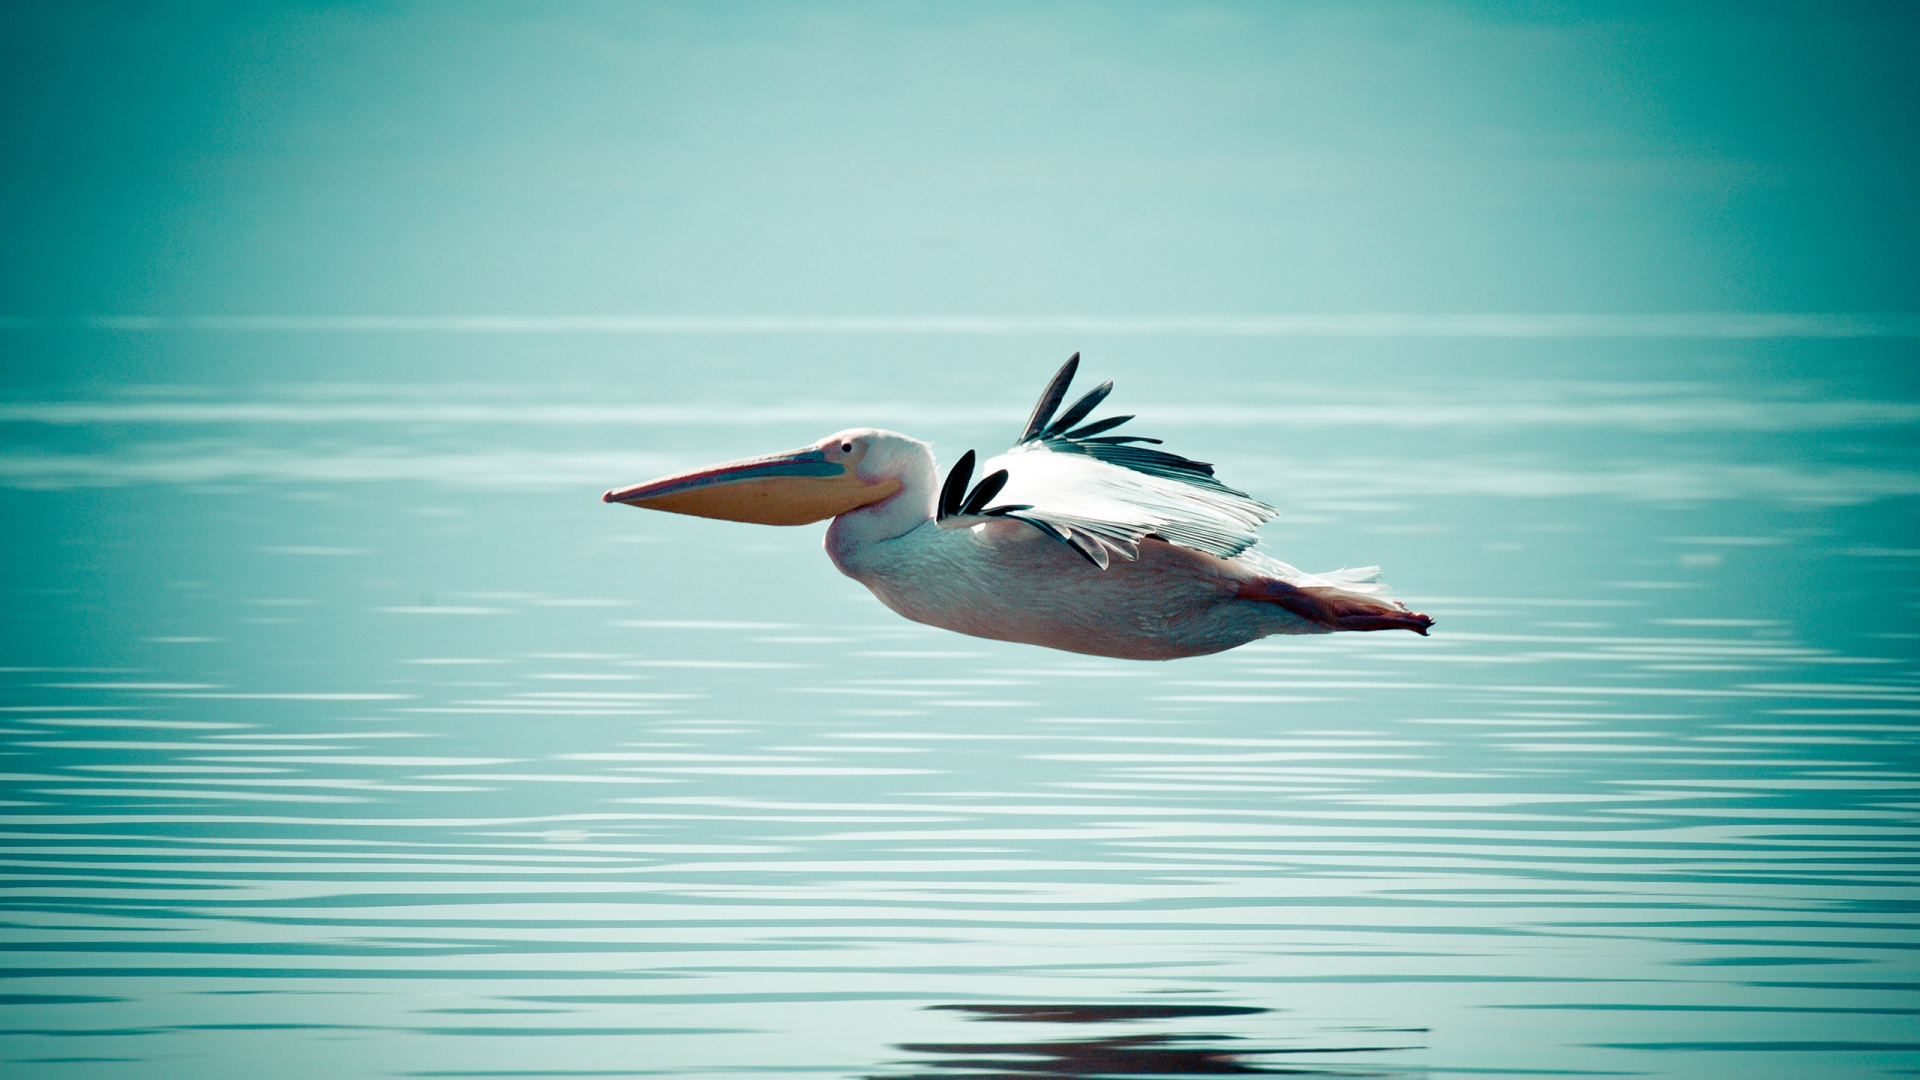 Pelican Flying Over Water for 1920 x 1080 HDTV 1080p resolution